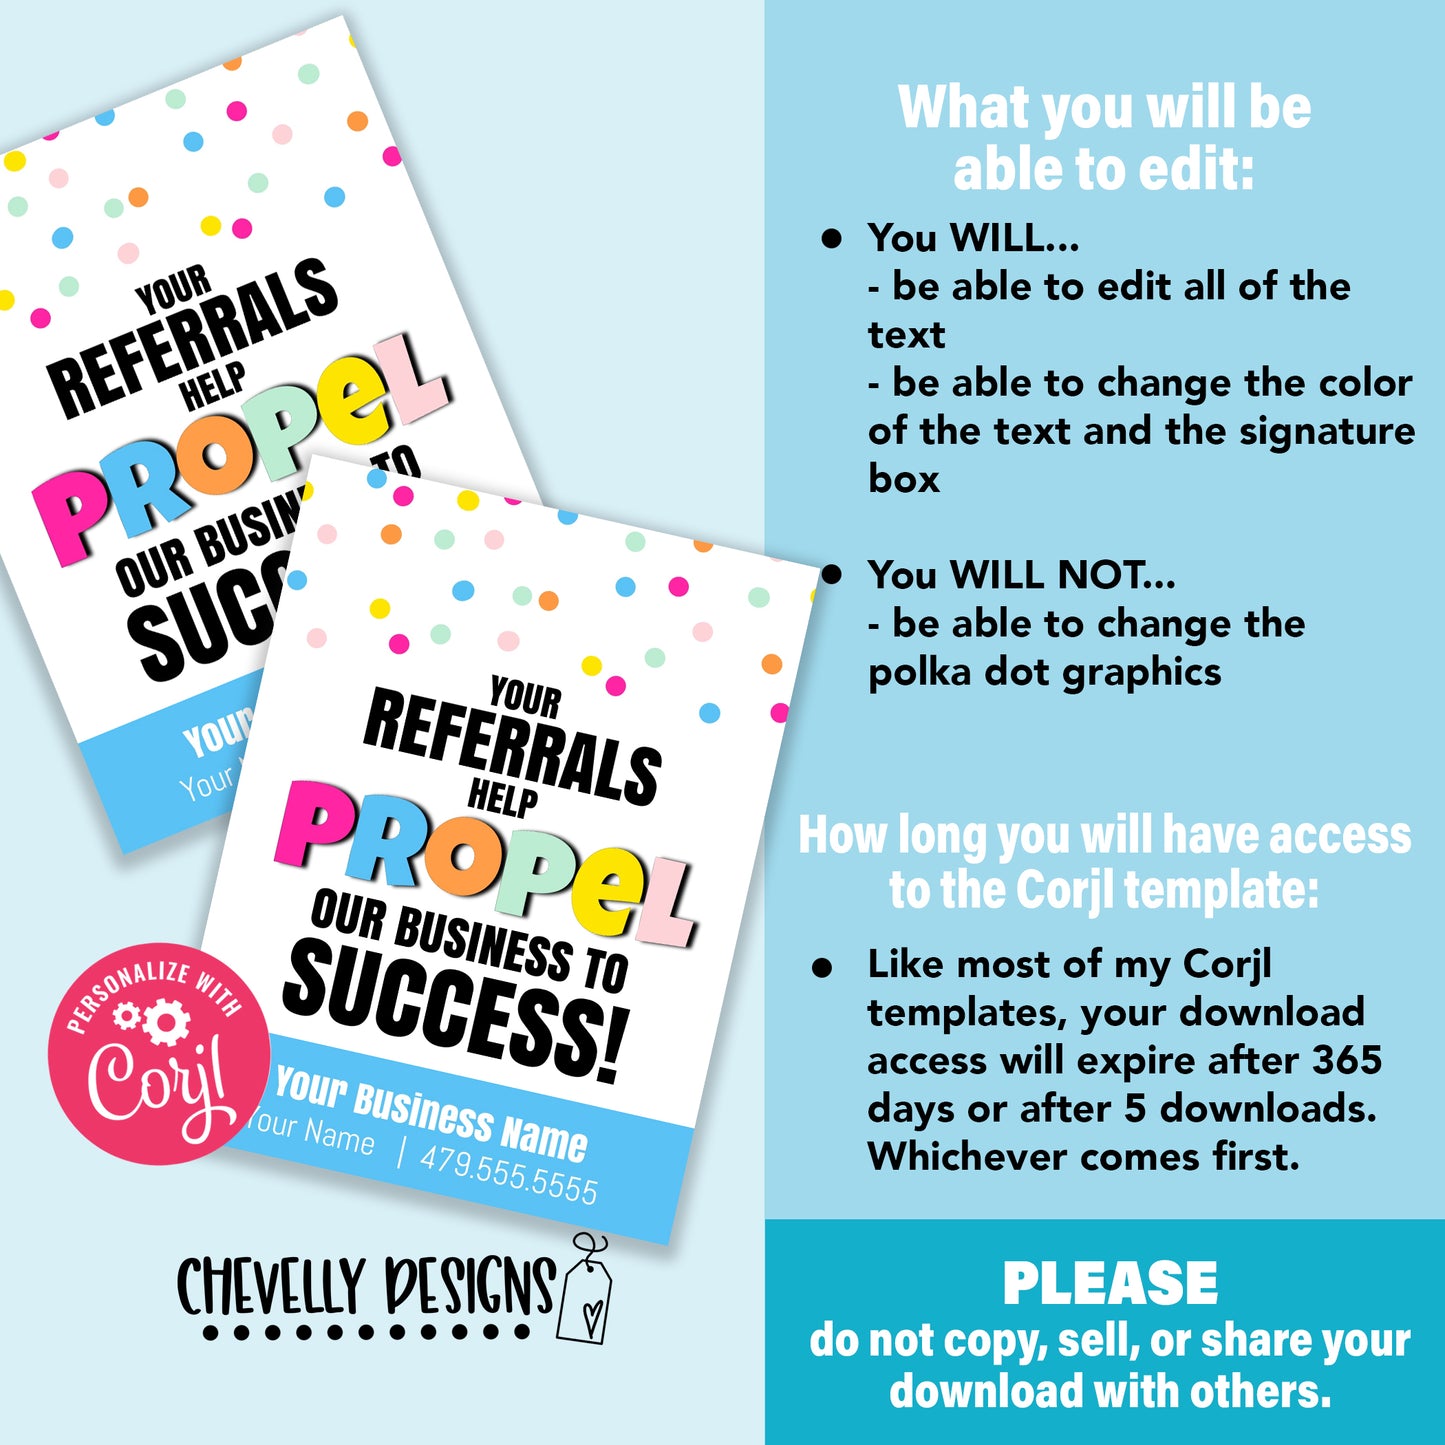 EDITABLE - Your Referrals Propel our Business - Printable Referral Marketing Tags